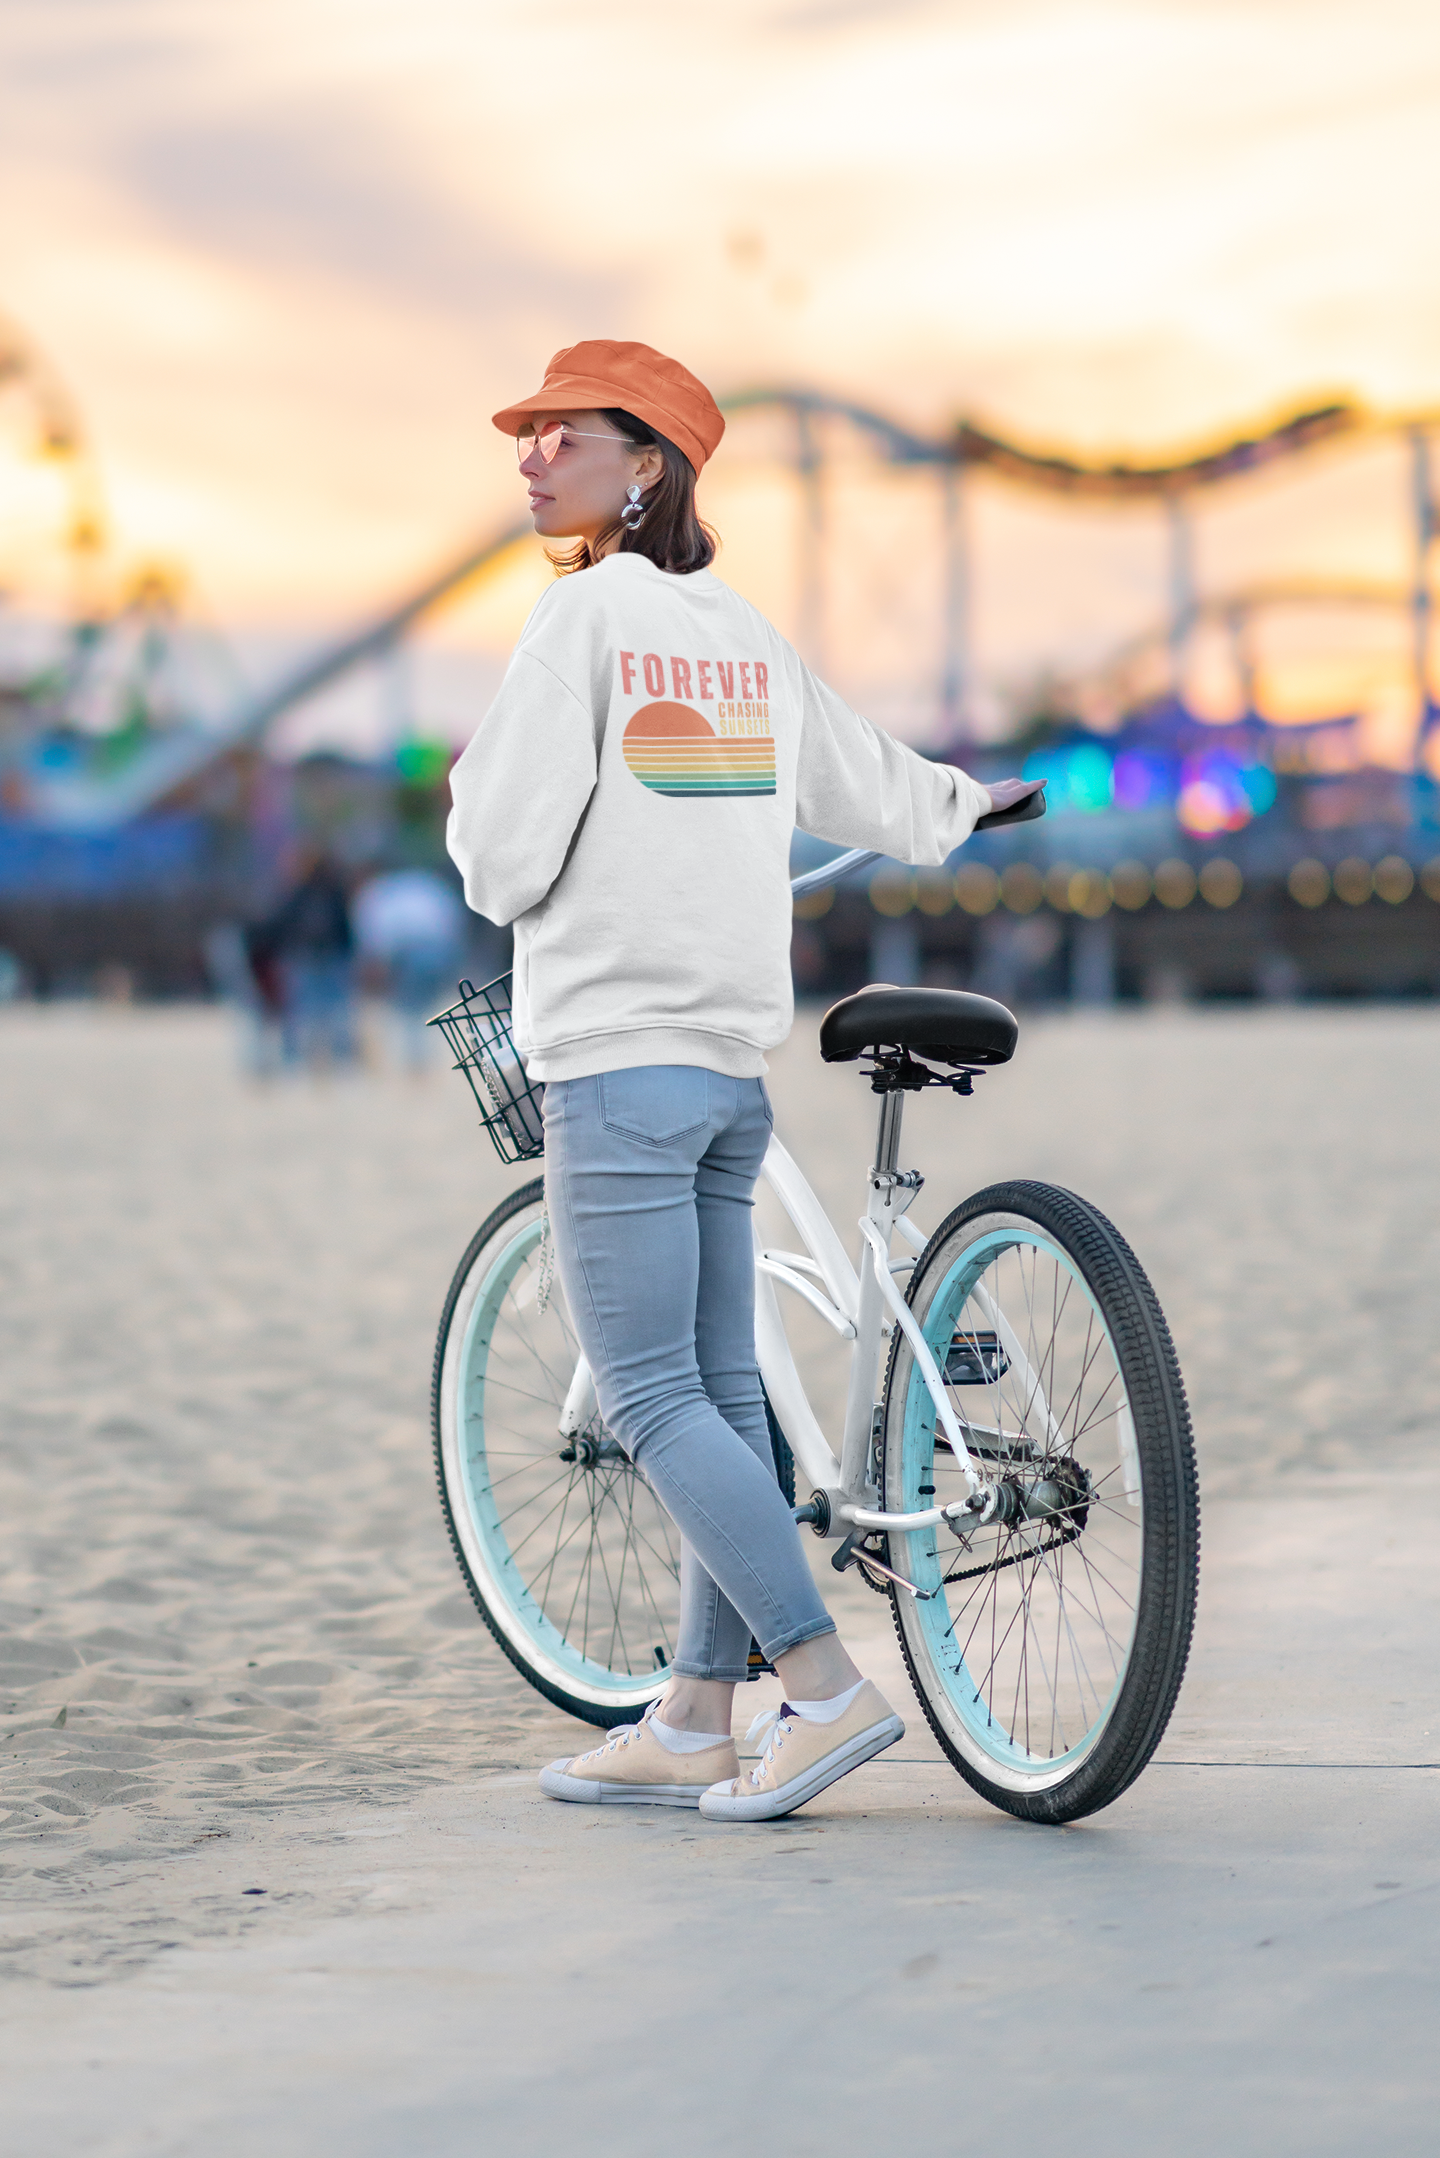 Forever Chasing Sunsets - Unisex Heavy Blend Crewneck Sweatshirt - Ethical & Durable Comfort - Perfect for Any Season